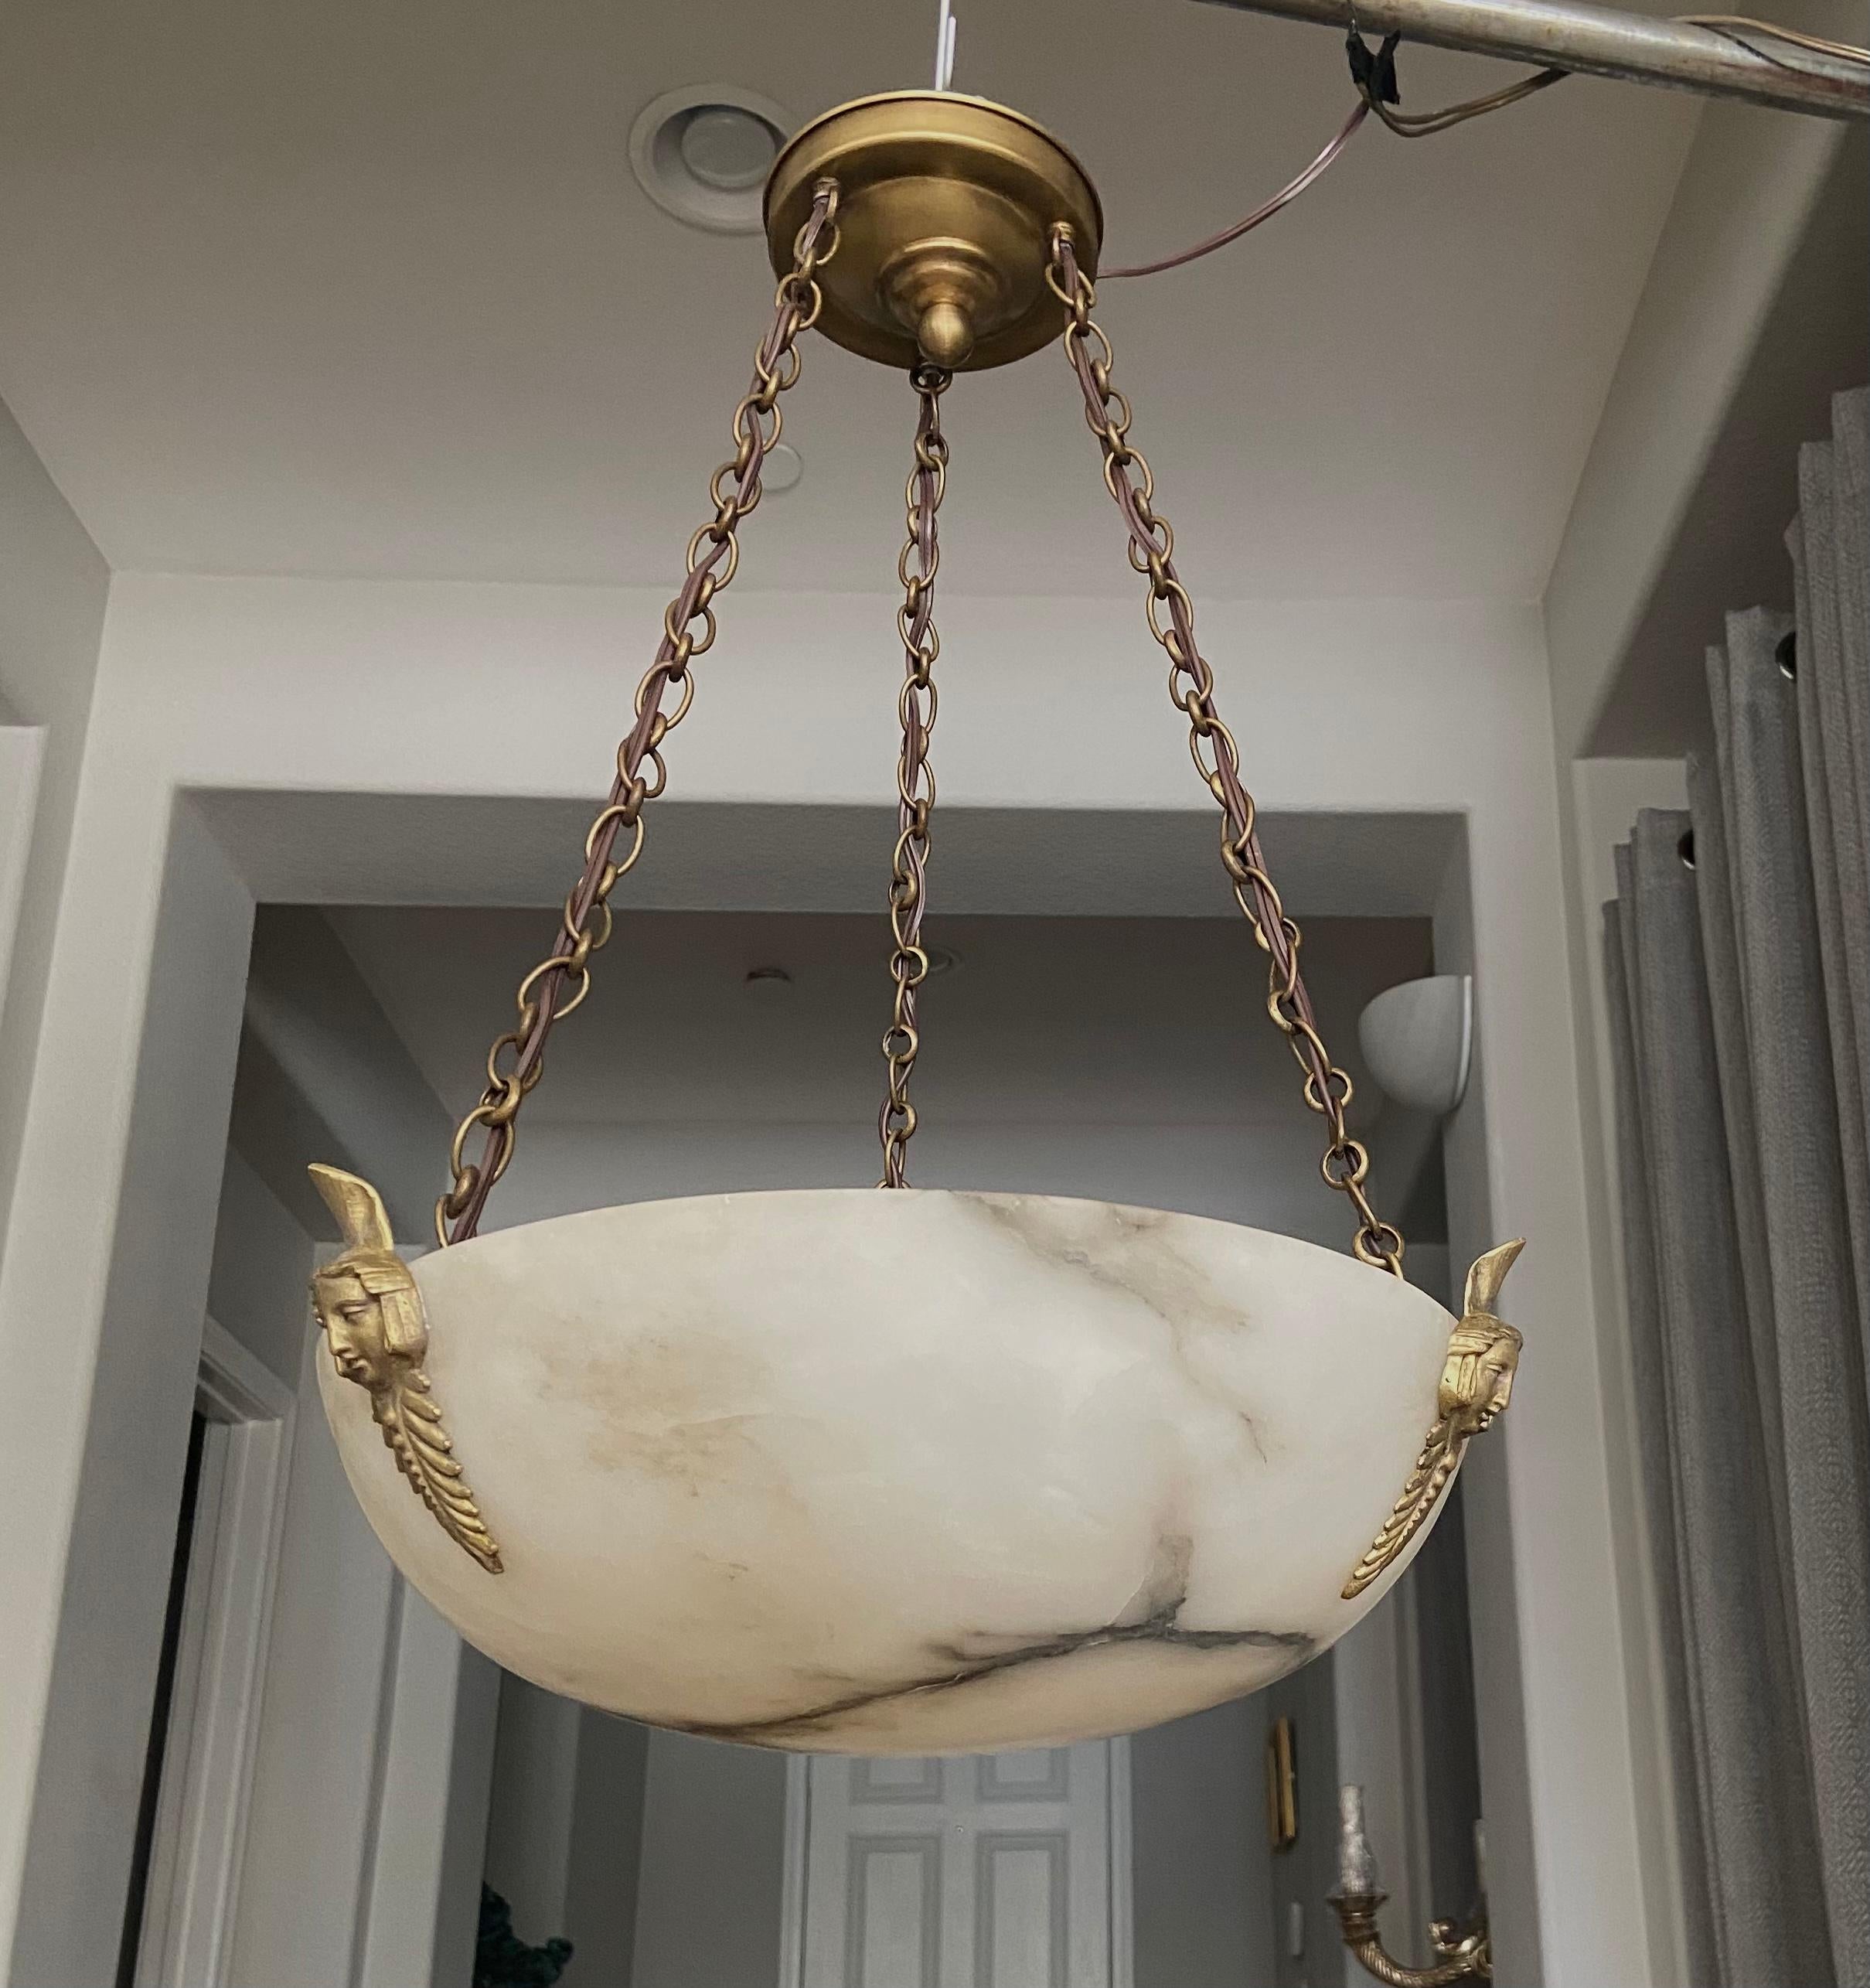 French 1930s alabaster pendant light or chandelier with brass fittings in the Directoire style. Beautiful natural veining to alabaster and quality fittings. Newly wired for US, fixture uses three candelabra or 